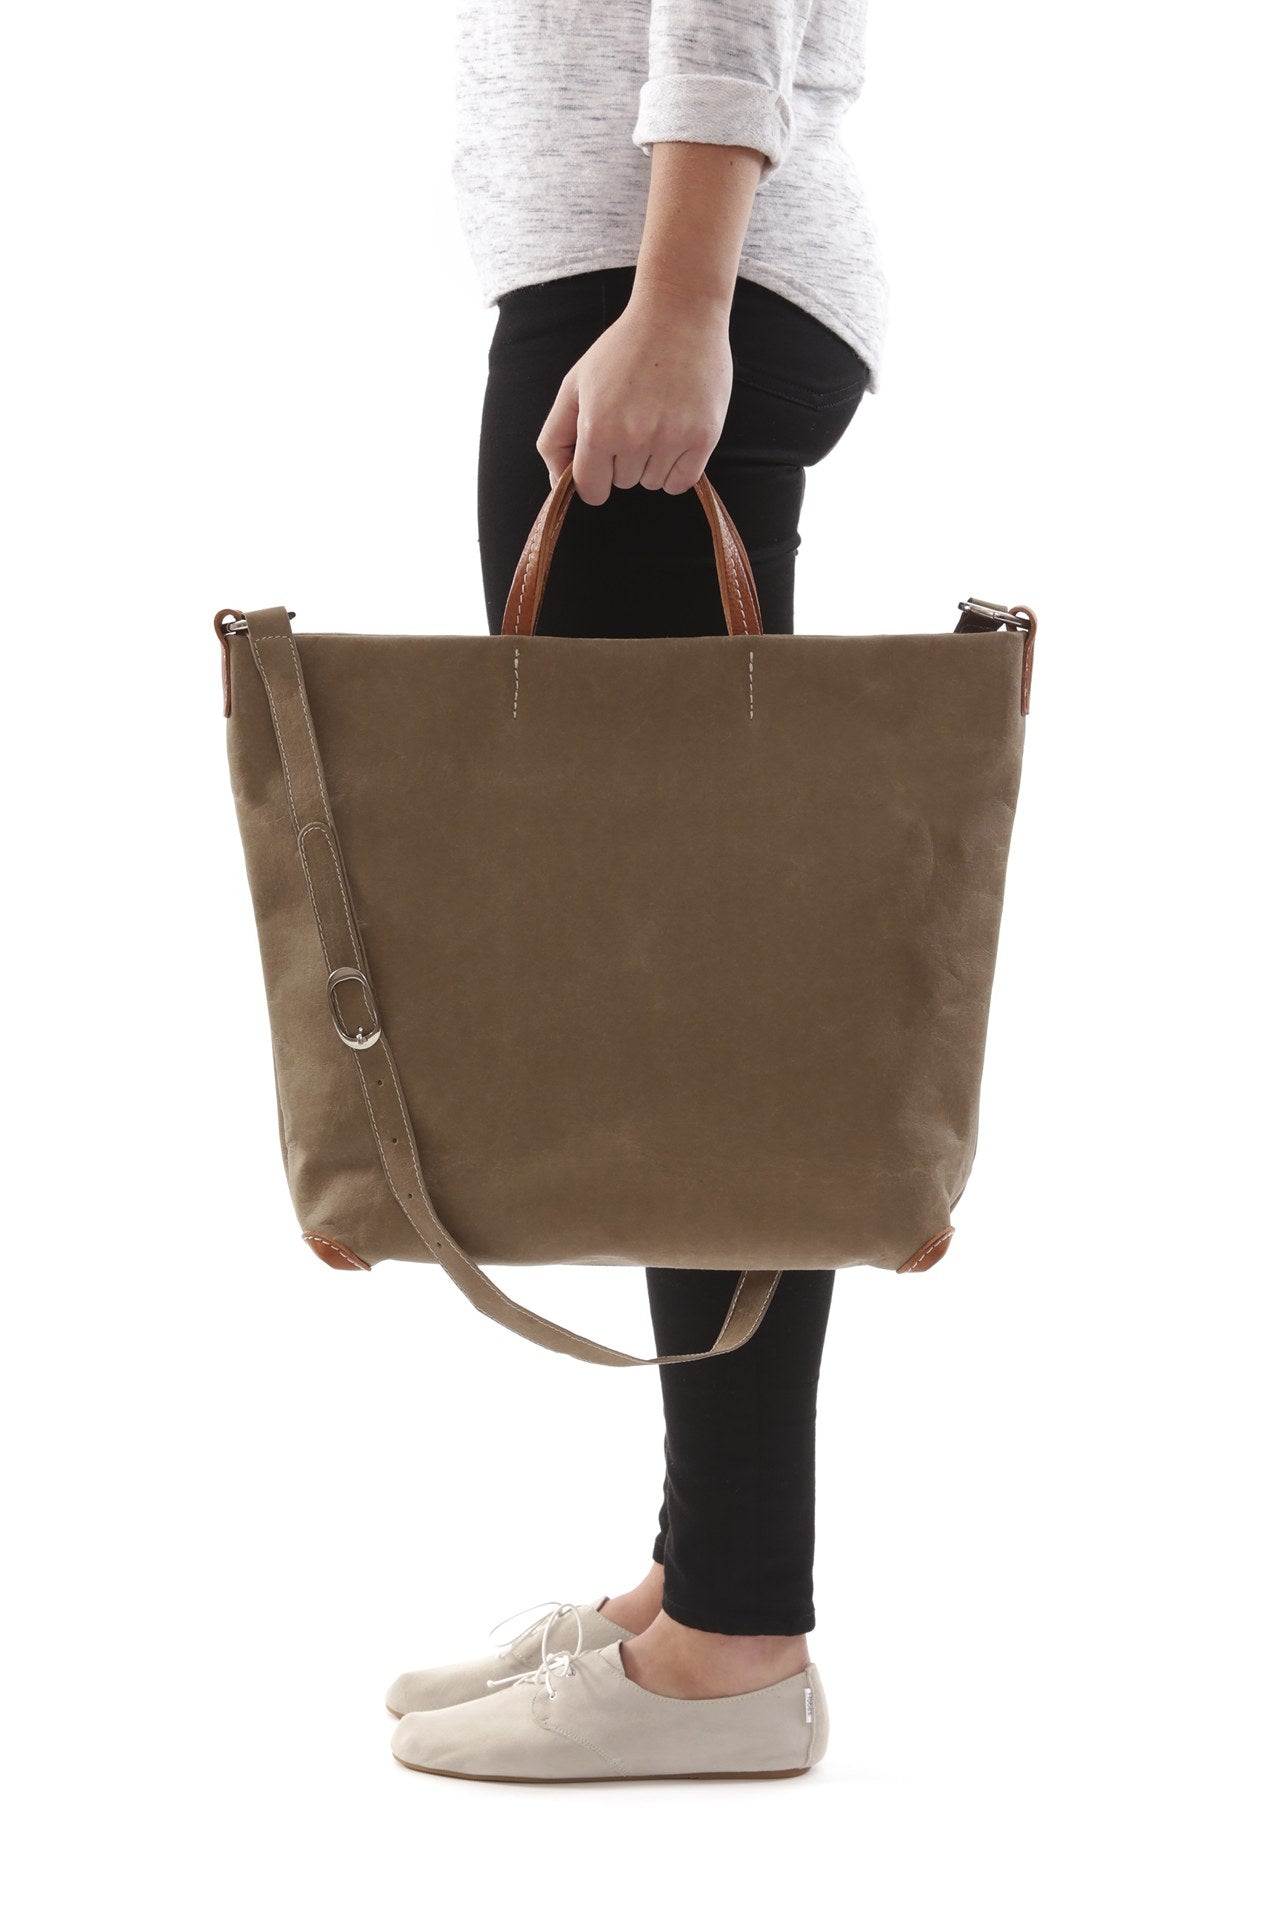 A woman is shown from a side view. She is carrying a sand coloured washable paper tote bag in her hand by the top handles.